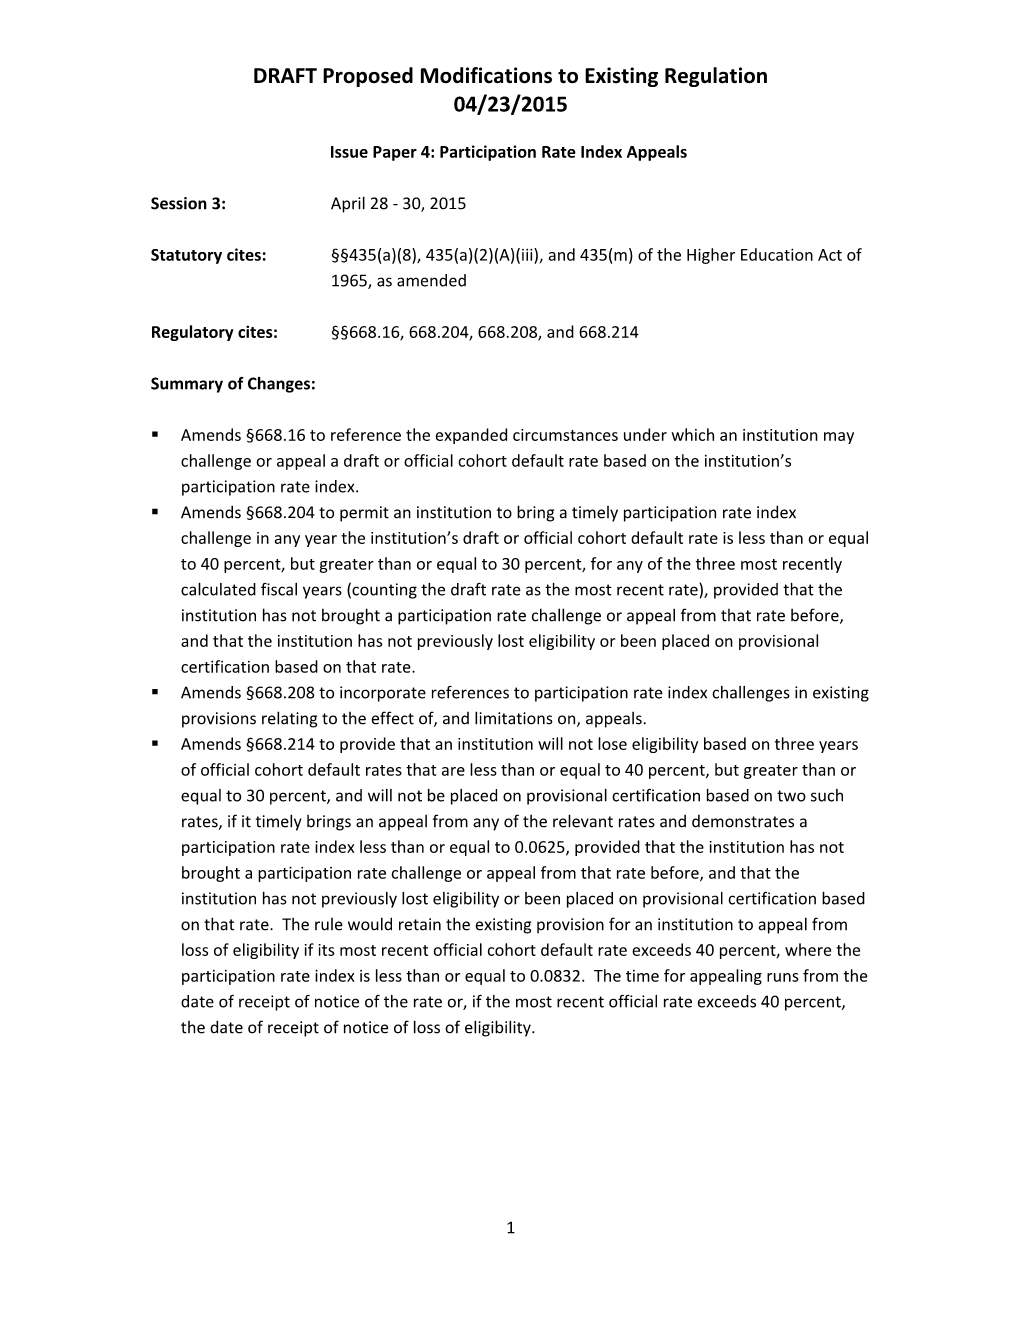 Negotiated Rulemaking for Higher Education 2015: PAYE Session 3, Issue 4: Participation